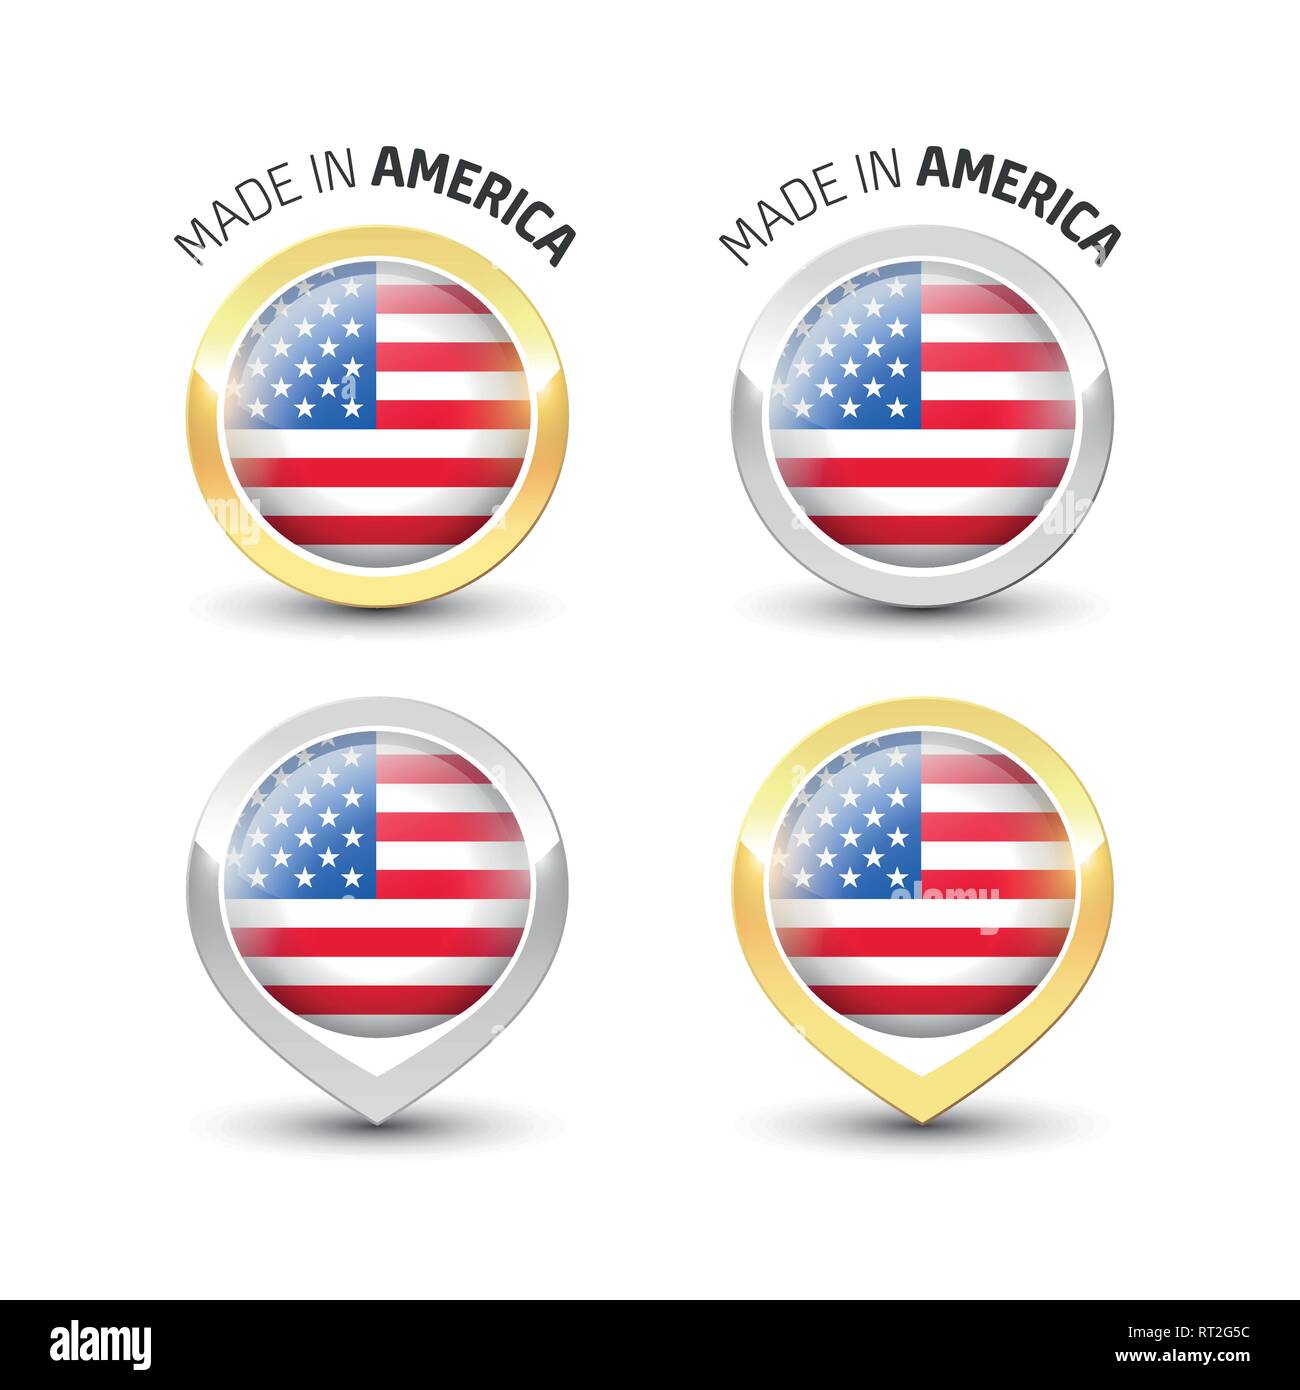 Made in America USA - Guarantee label with the flag of the United States of America inside round gold and silver icons. Stock Vector